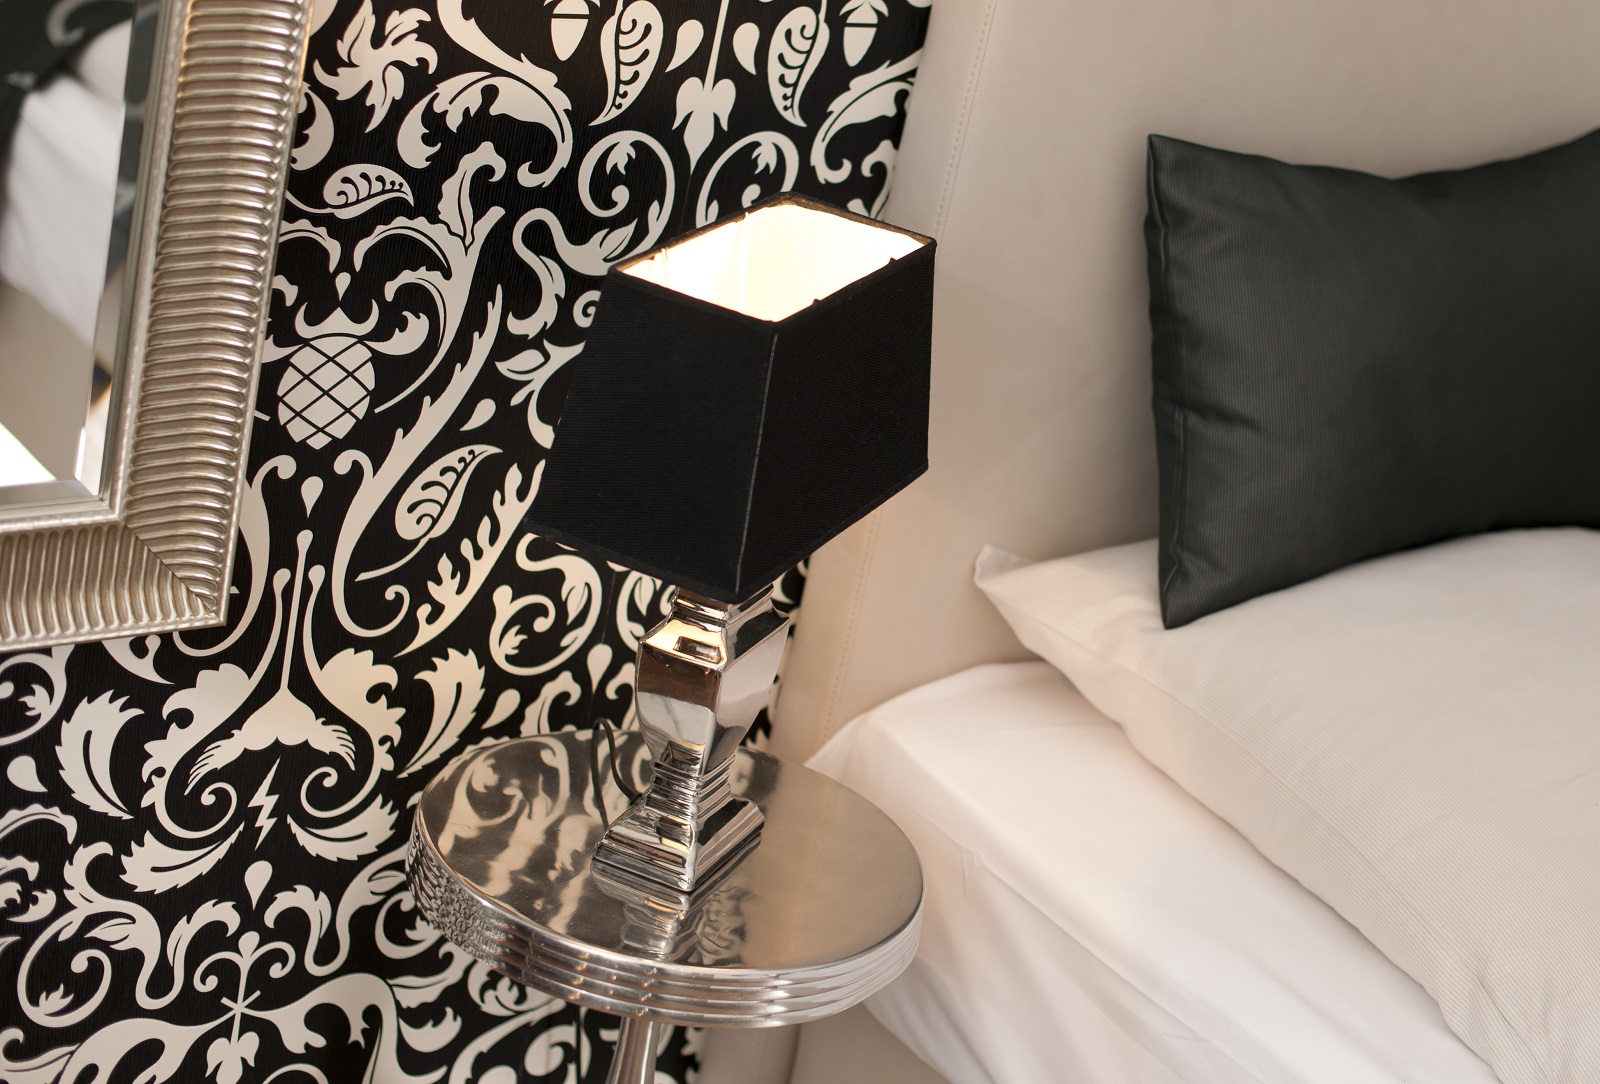 Hotel Residence Bremen <br/>104.50 ew <br/> <a href='http://vakantieoplossing.nl/outpage/?id=d4aabb0a0ba7a96cd2958ae7abca45a4' target='_blank'>View Details</a>